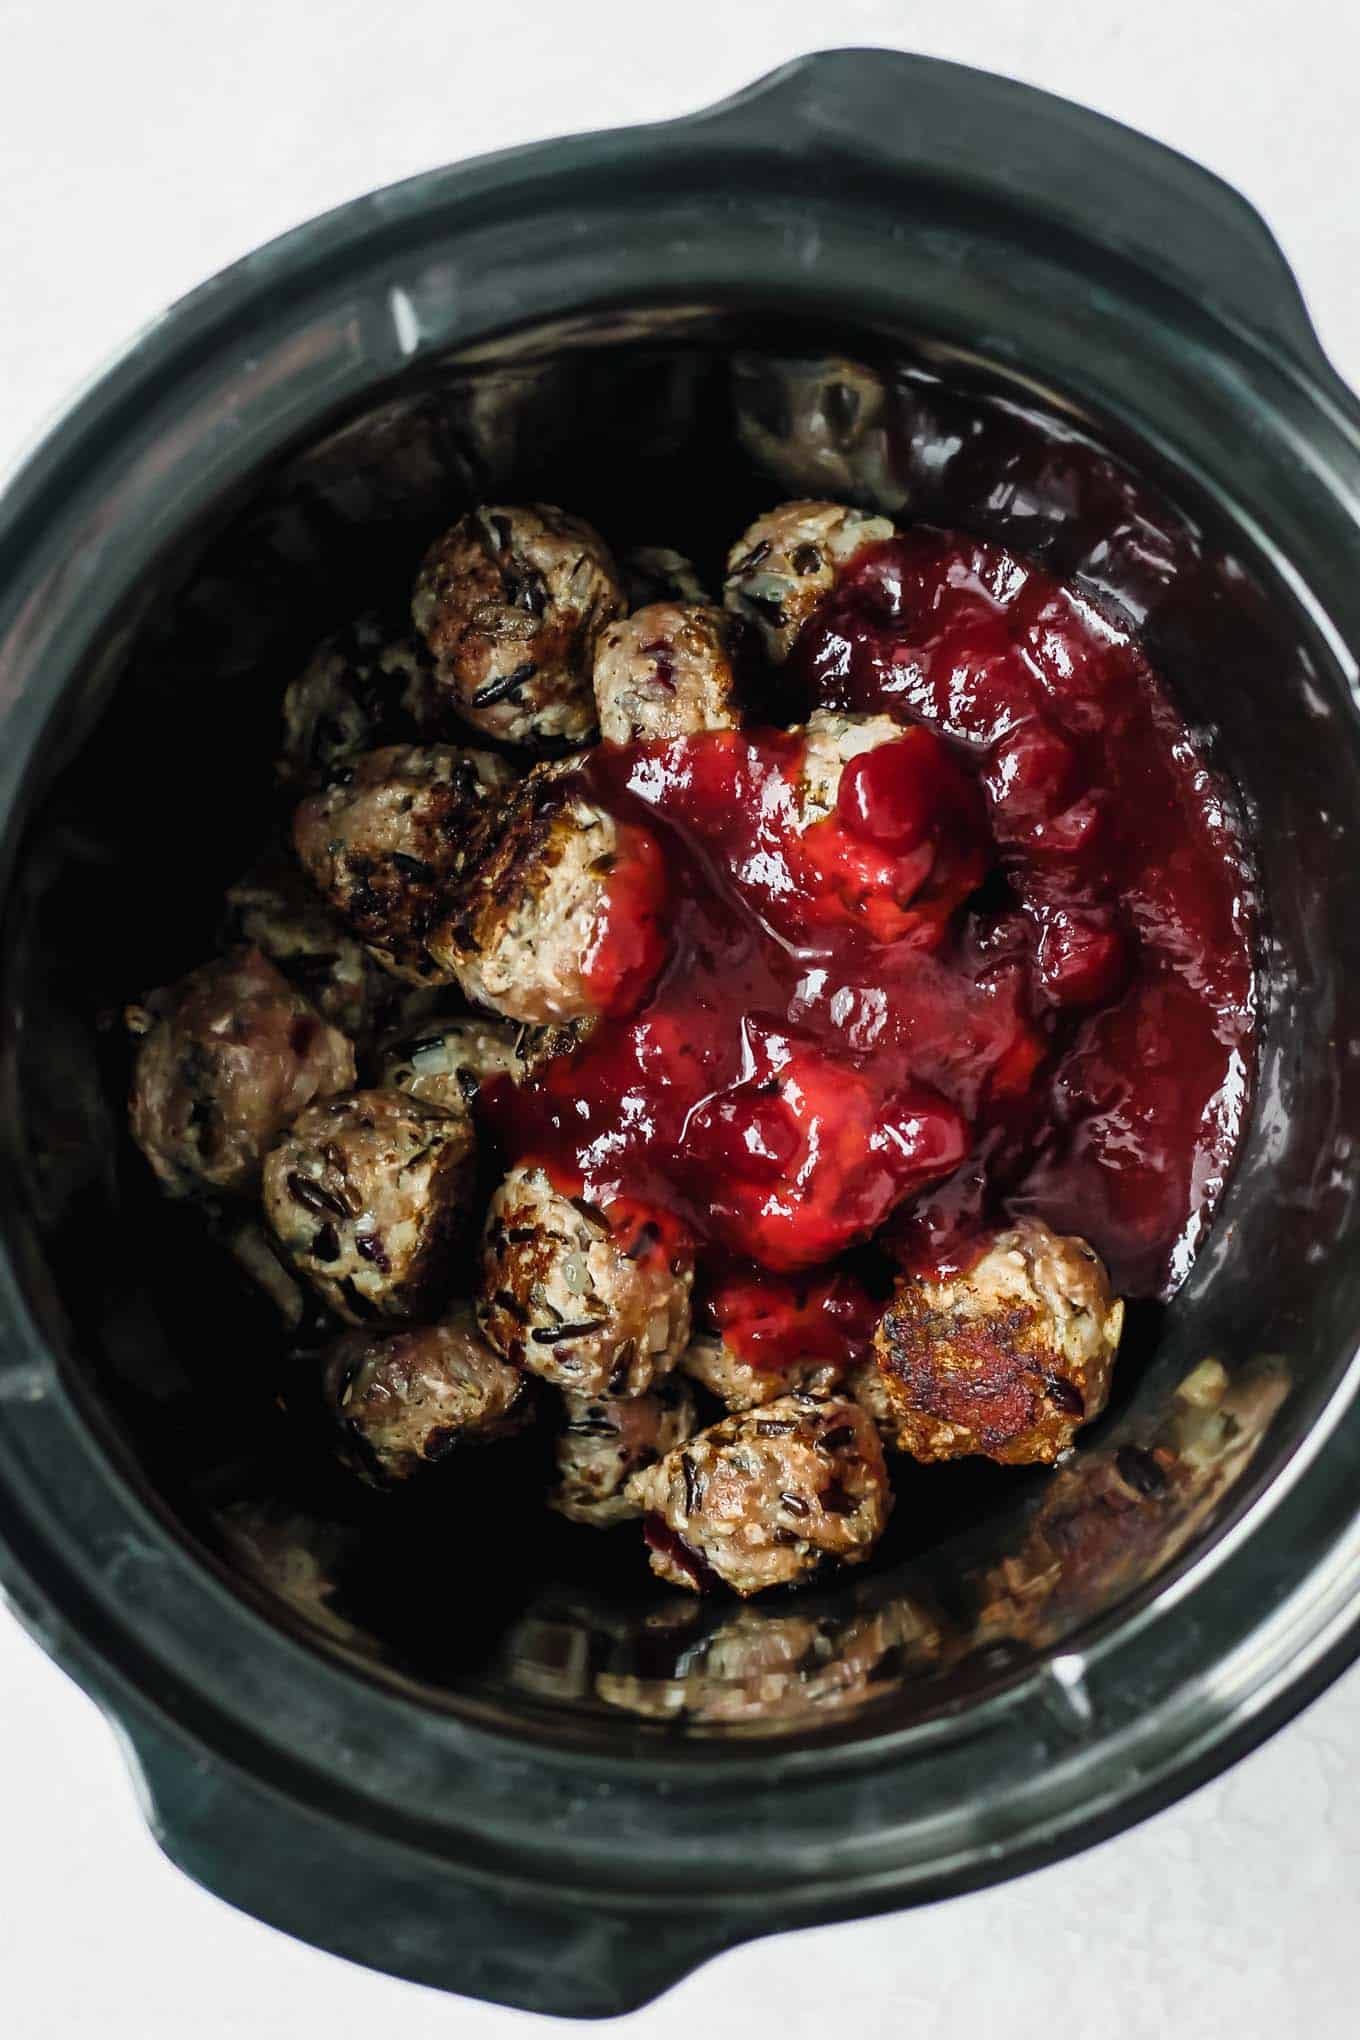 Meatballs in the slow cooker with sauce poured over